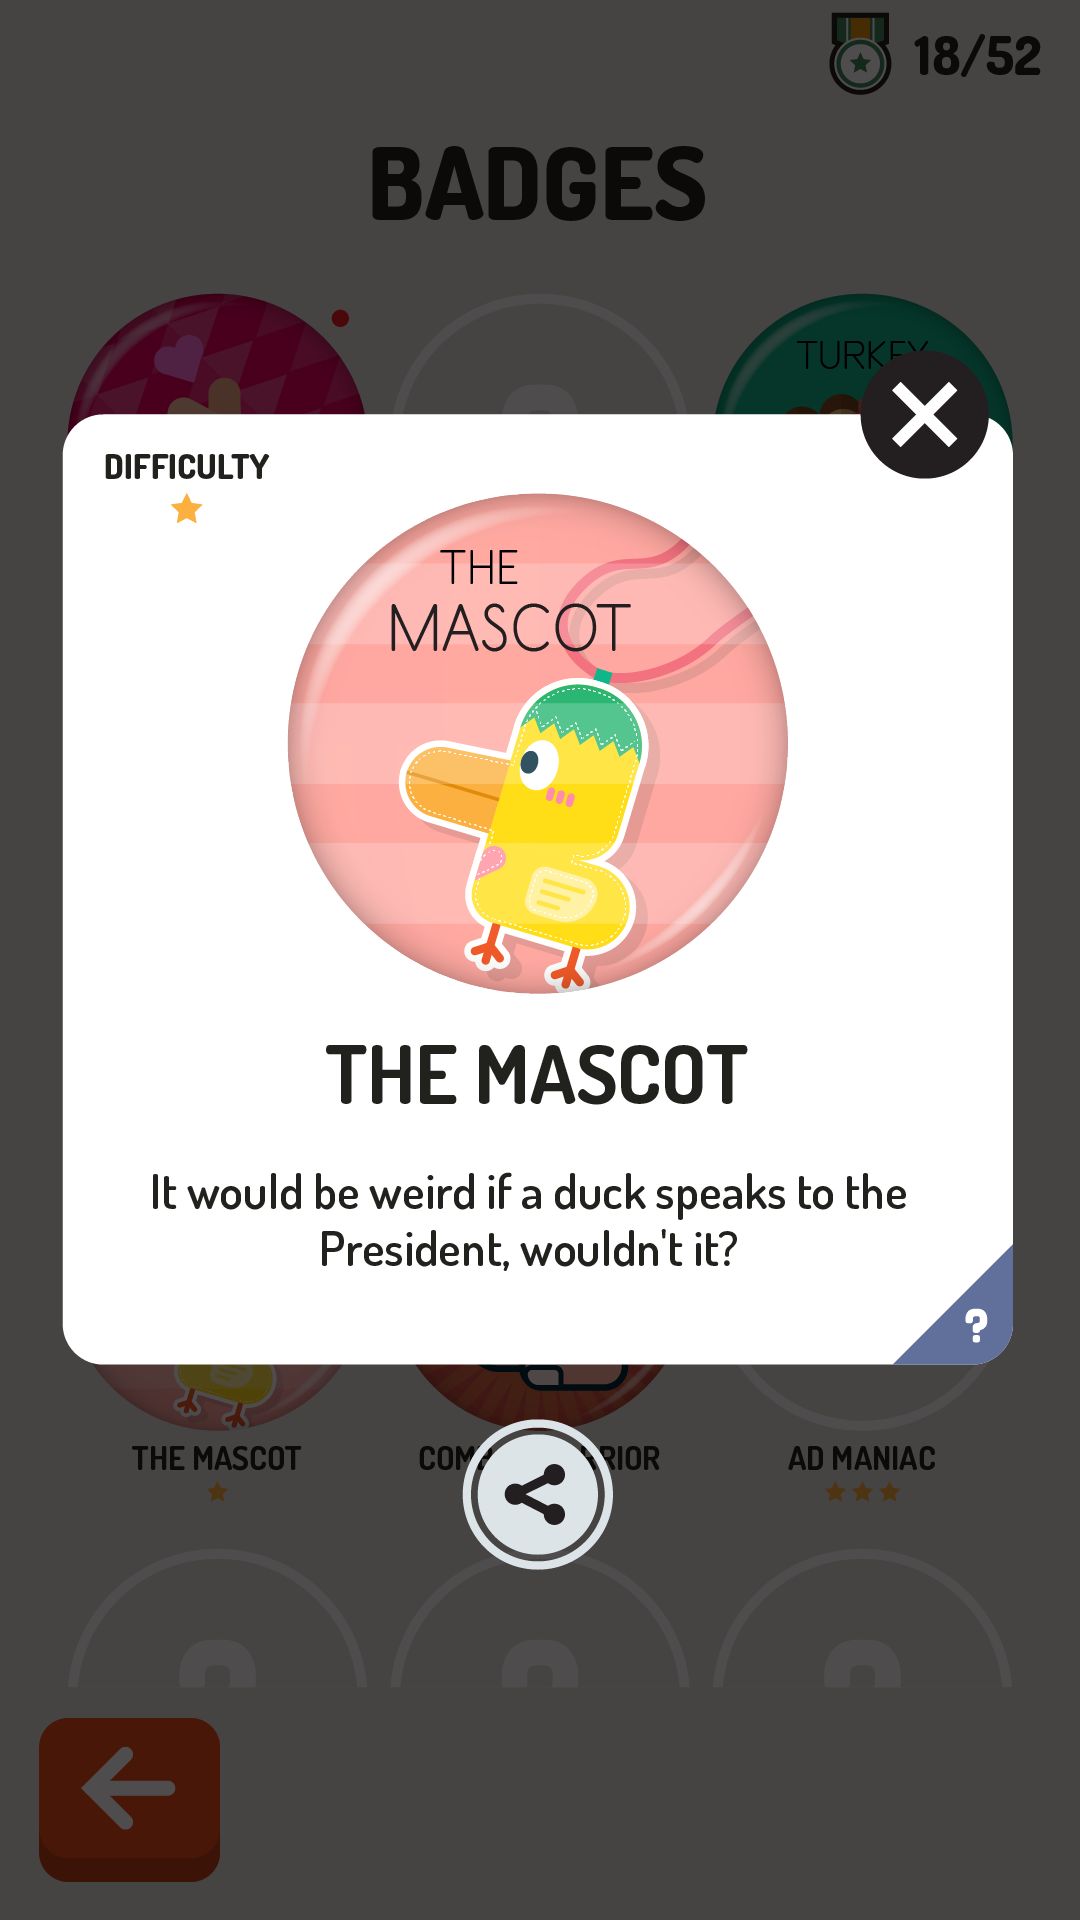 Hey! Mr. President - 2020 Election Simulator for Android